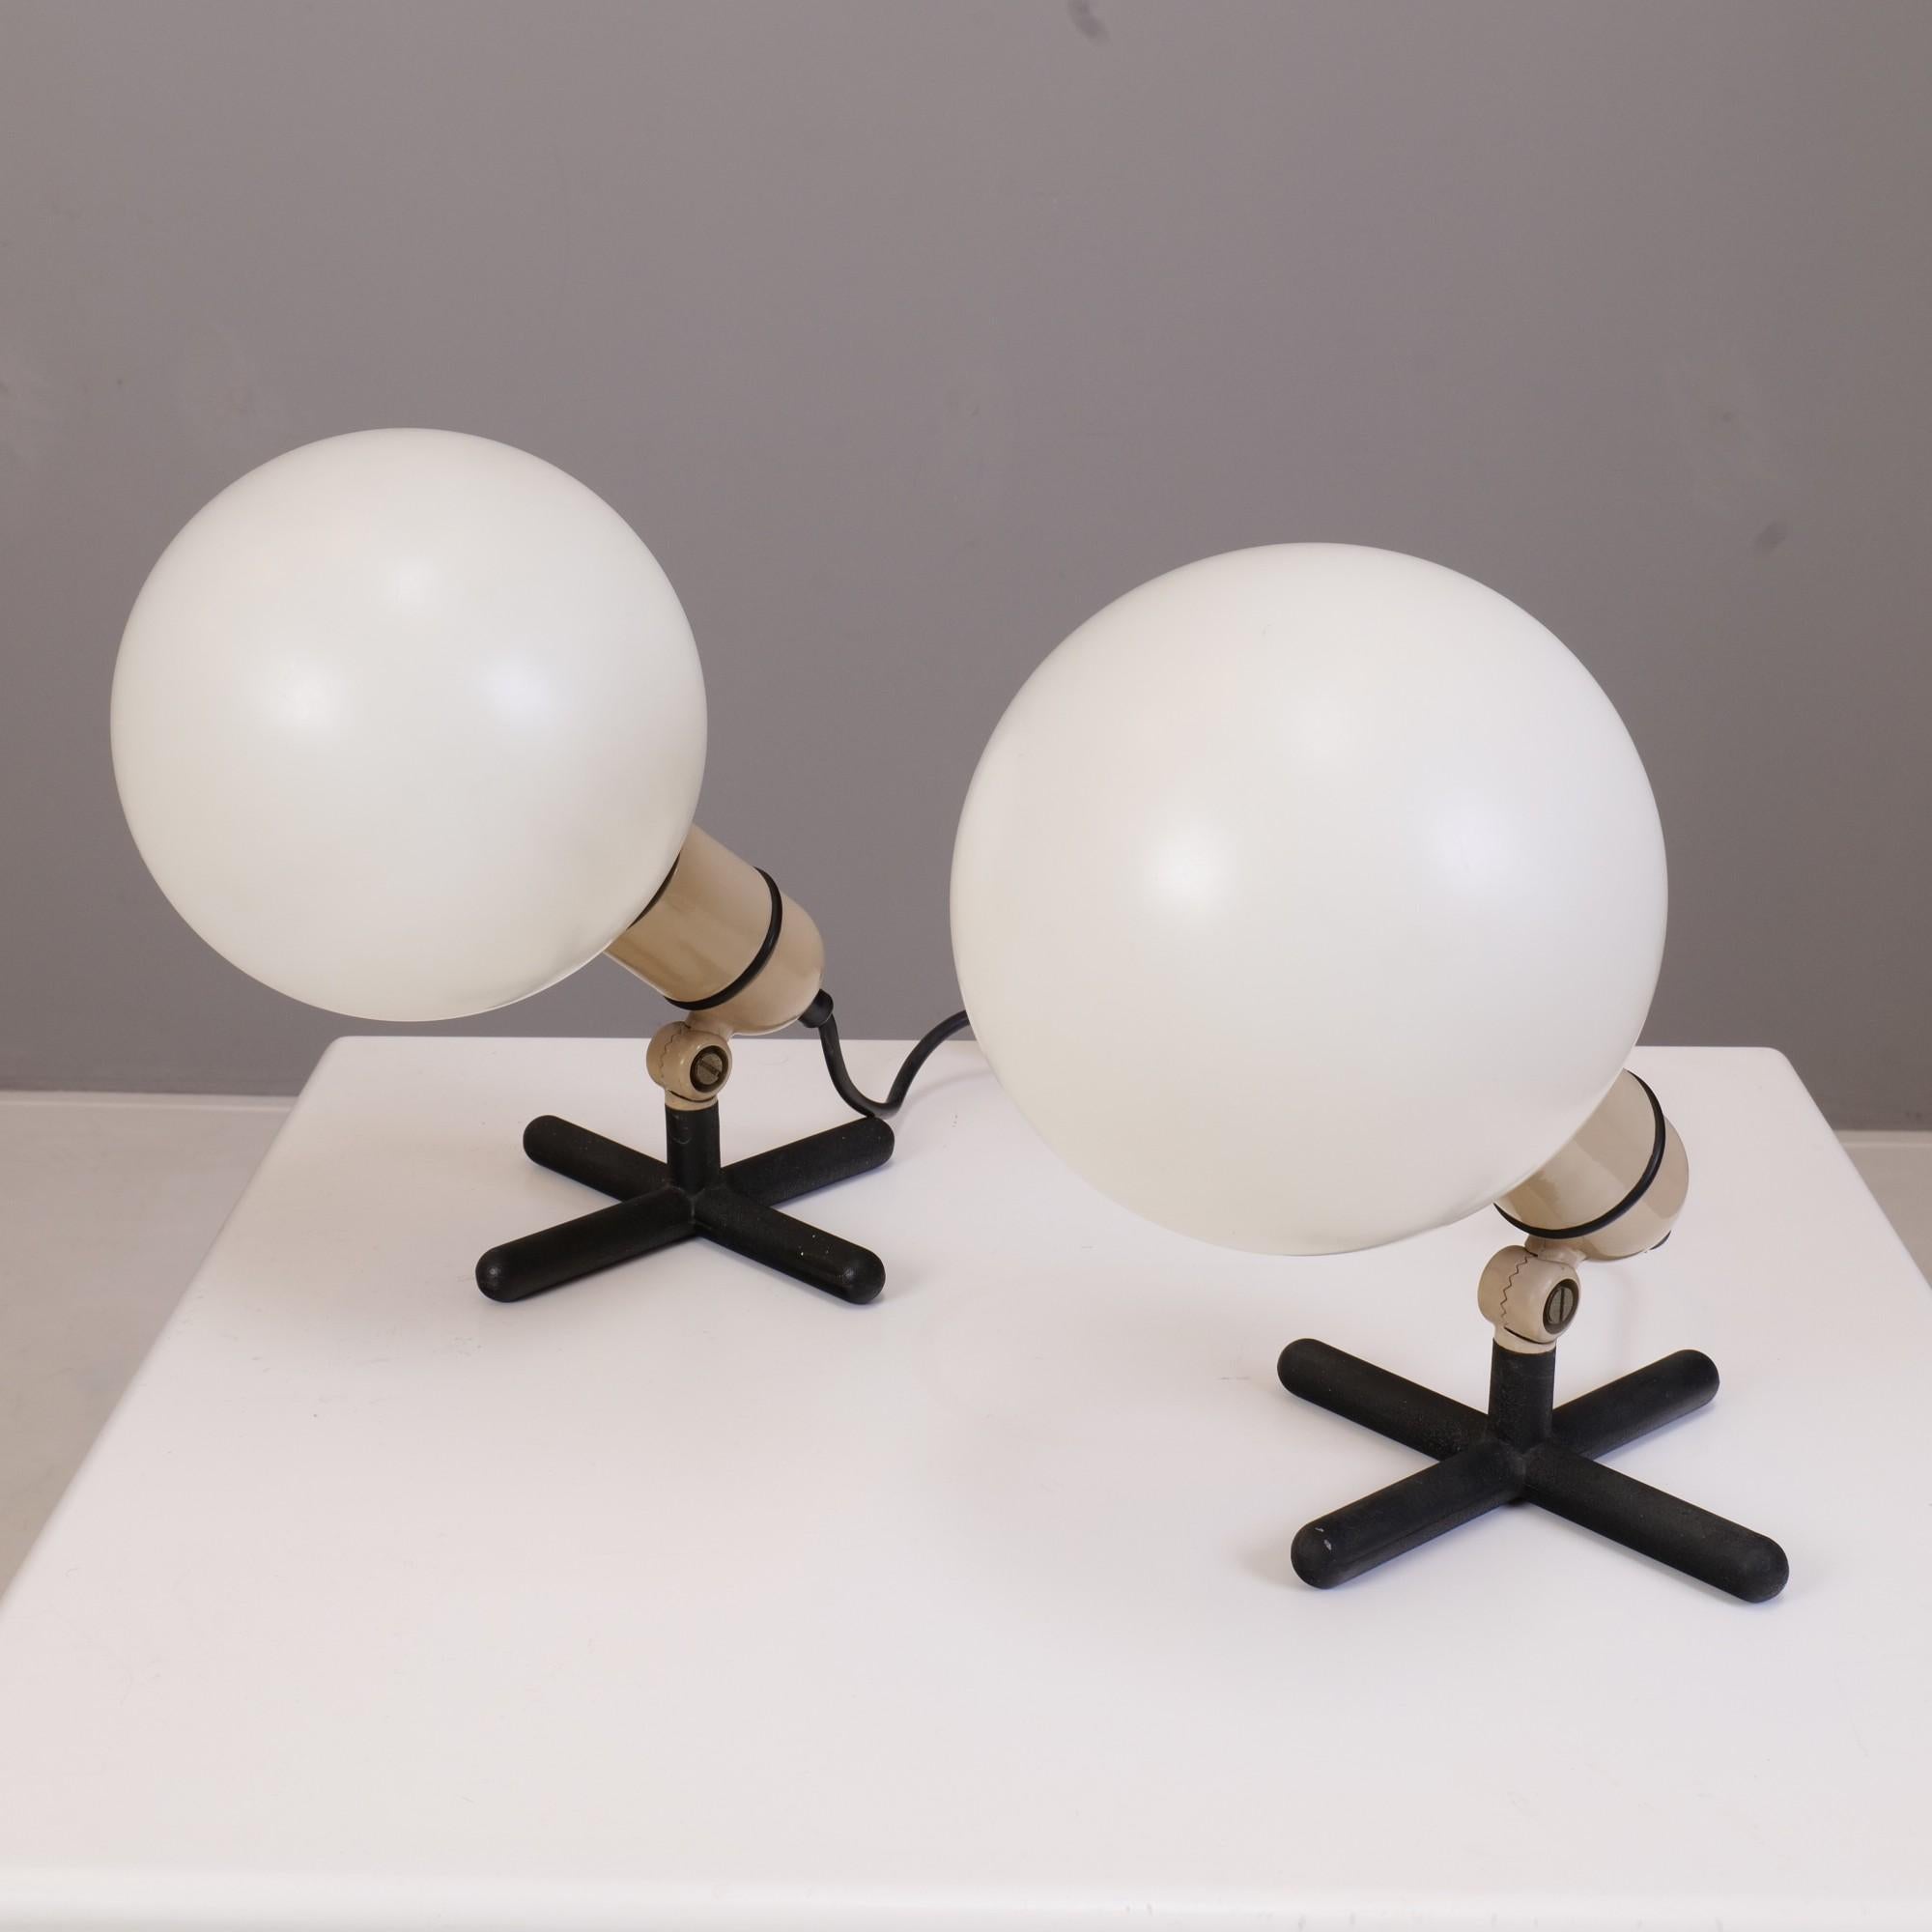 French Set of 2 Bubble Lamps by Jacques Biny for Lita, 1960's France